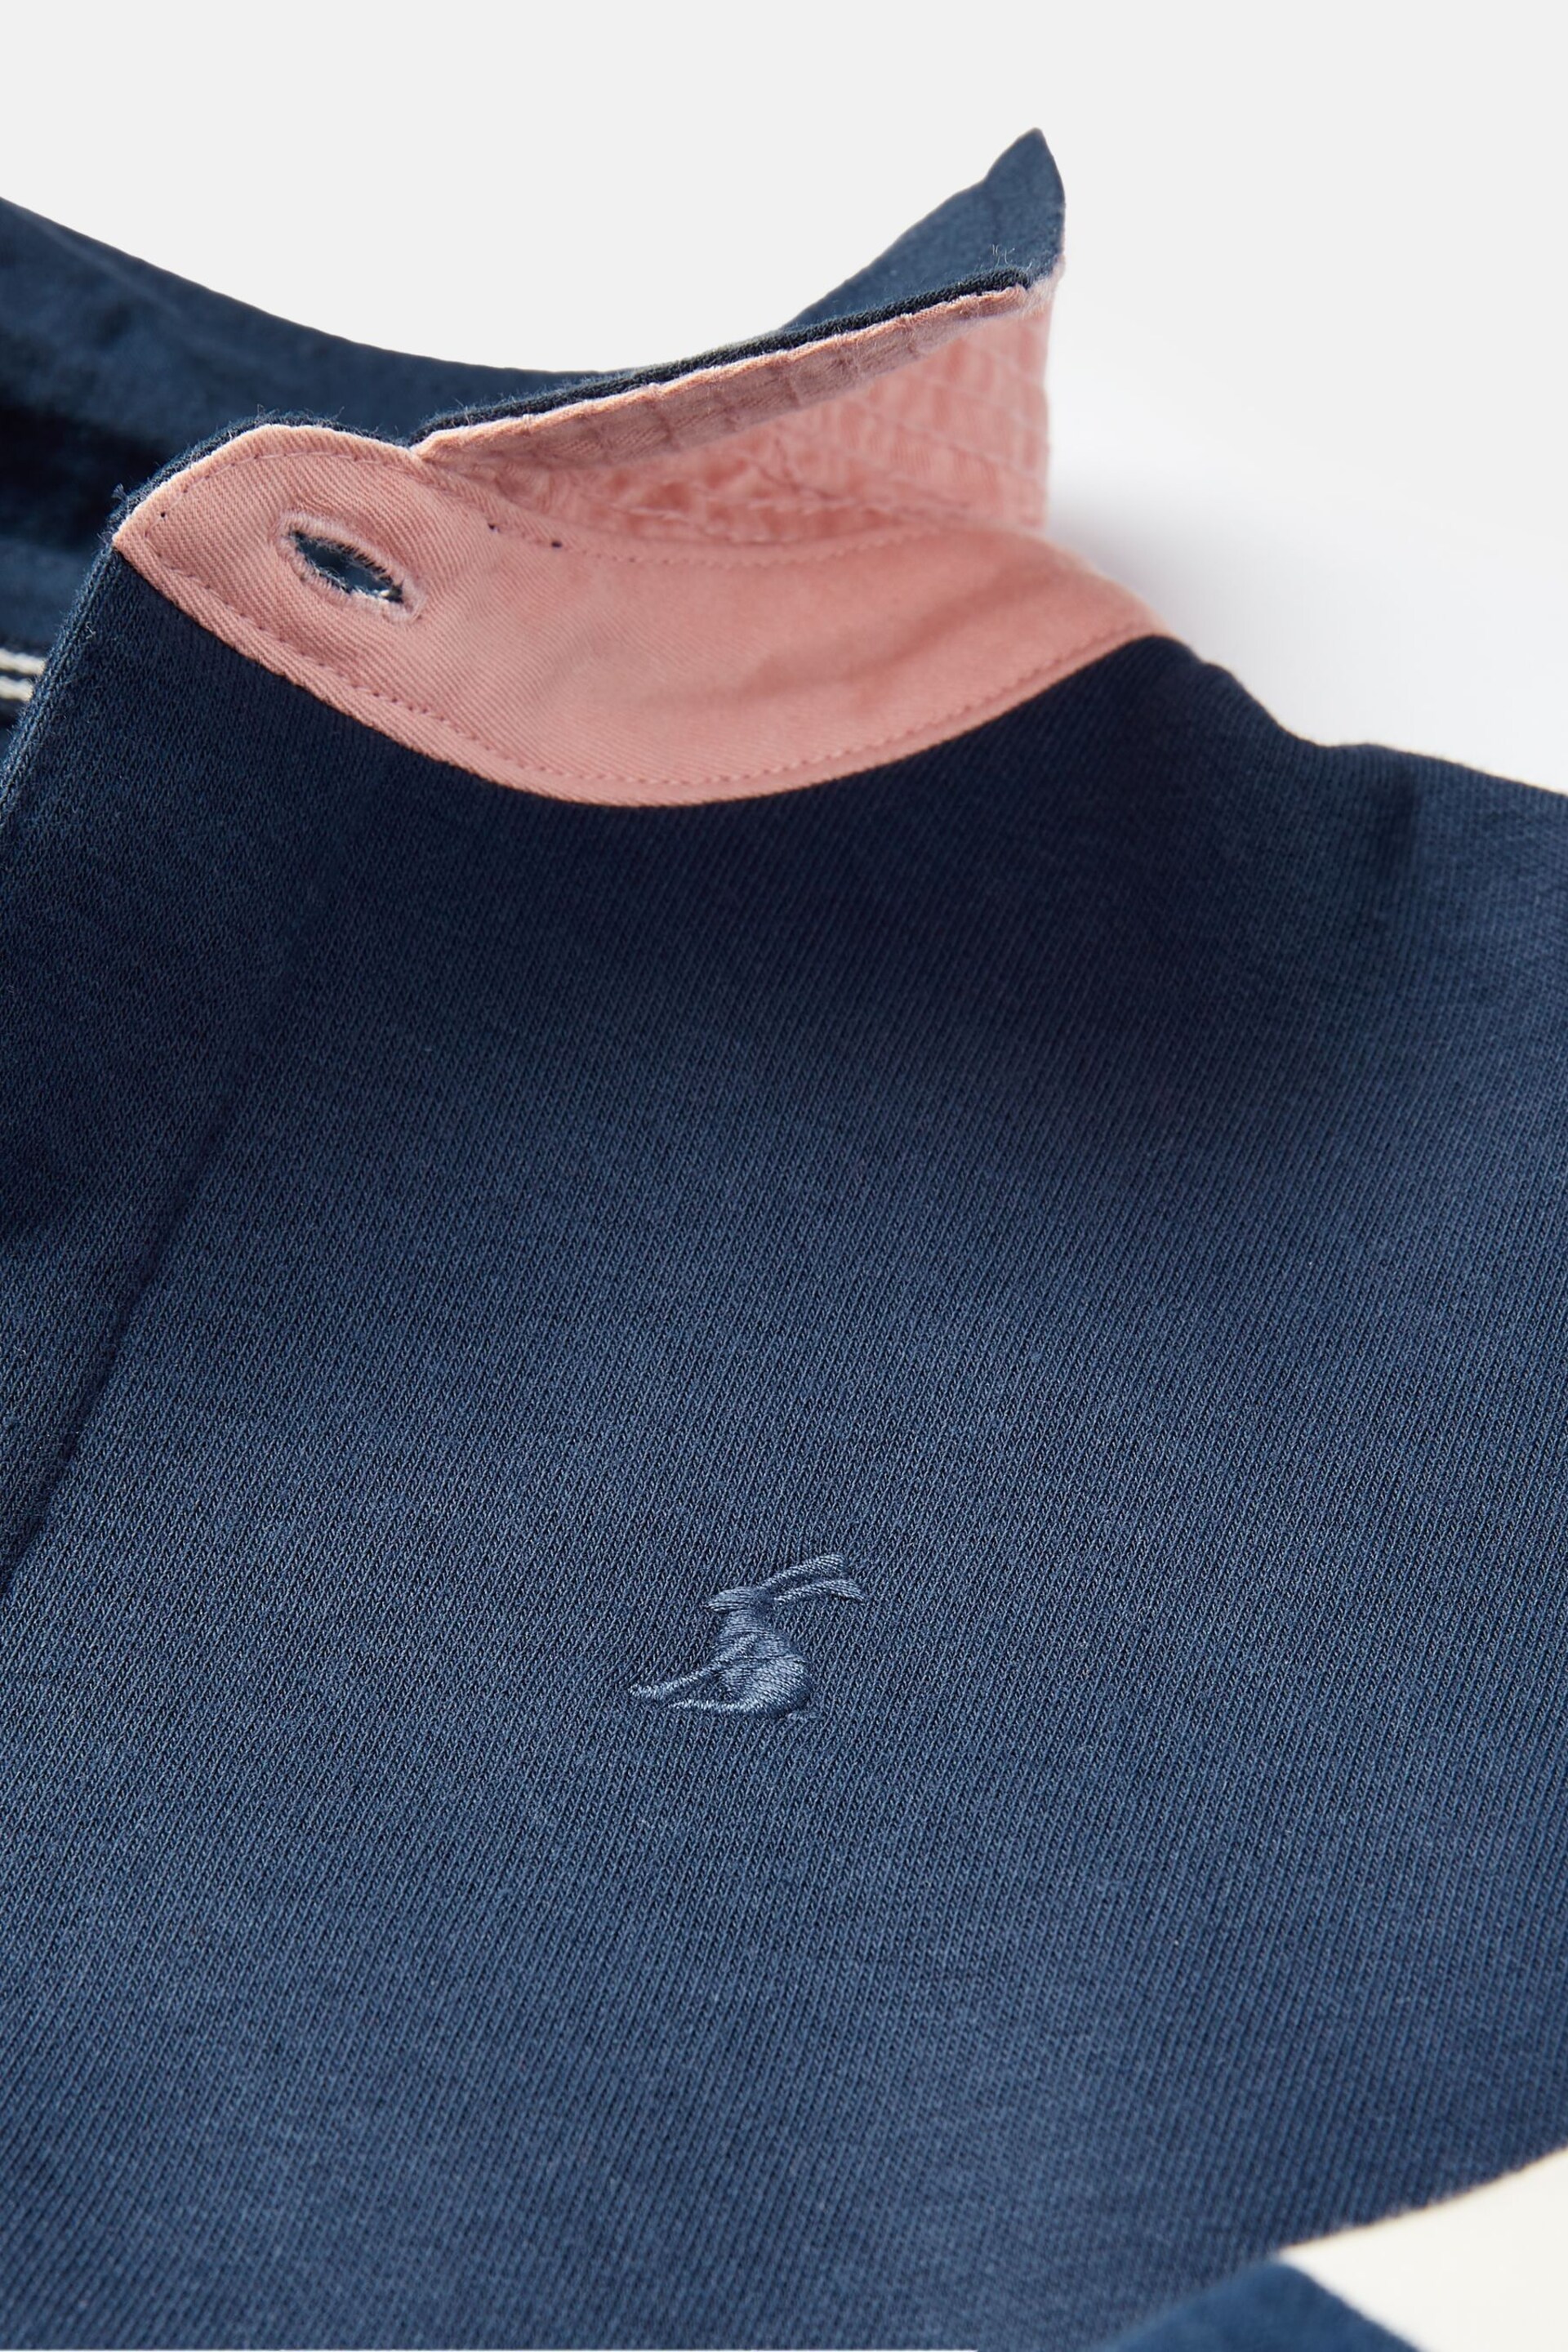 Joules Try Cream/Navy Rugby Sweatshirt - Image 4 of 6